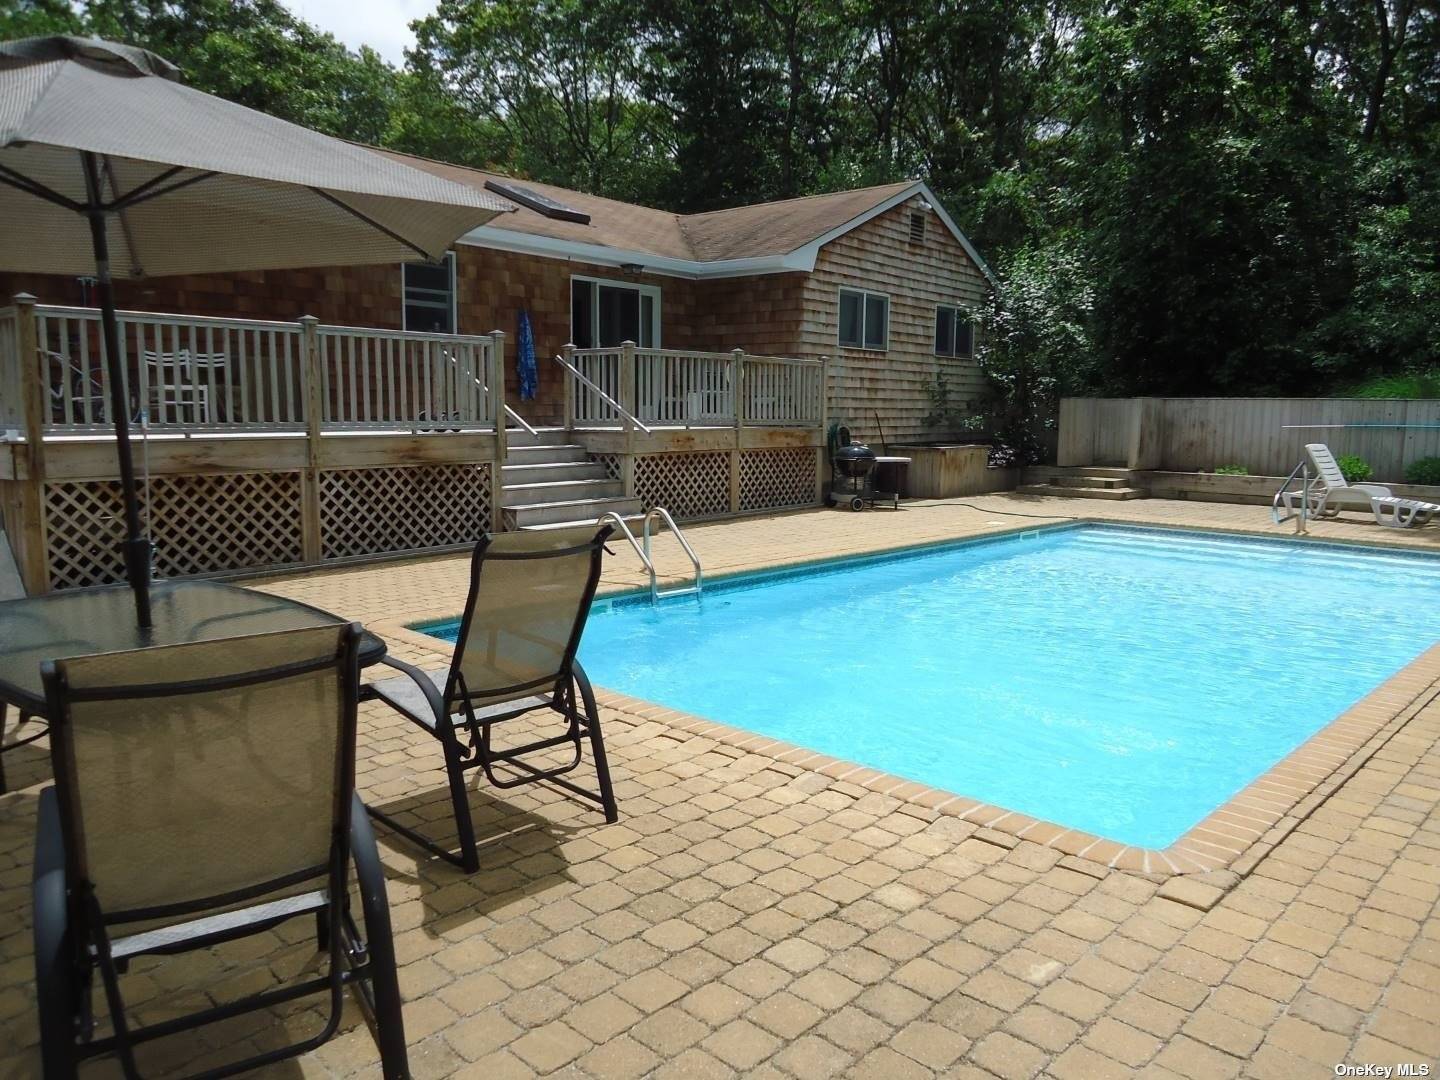 Cute 3 bedroom cape with heated pool and fully finished lower level with media rec room, full bath, and wet bar.